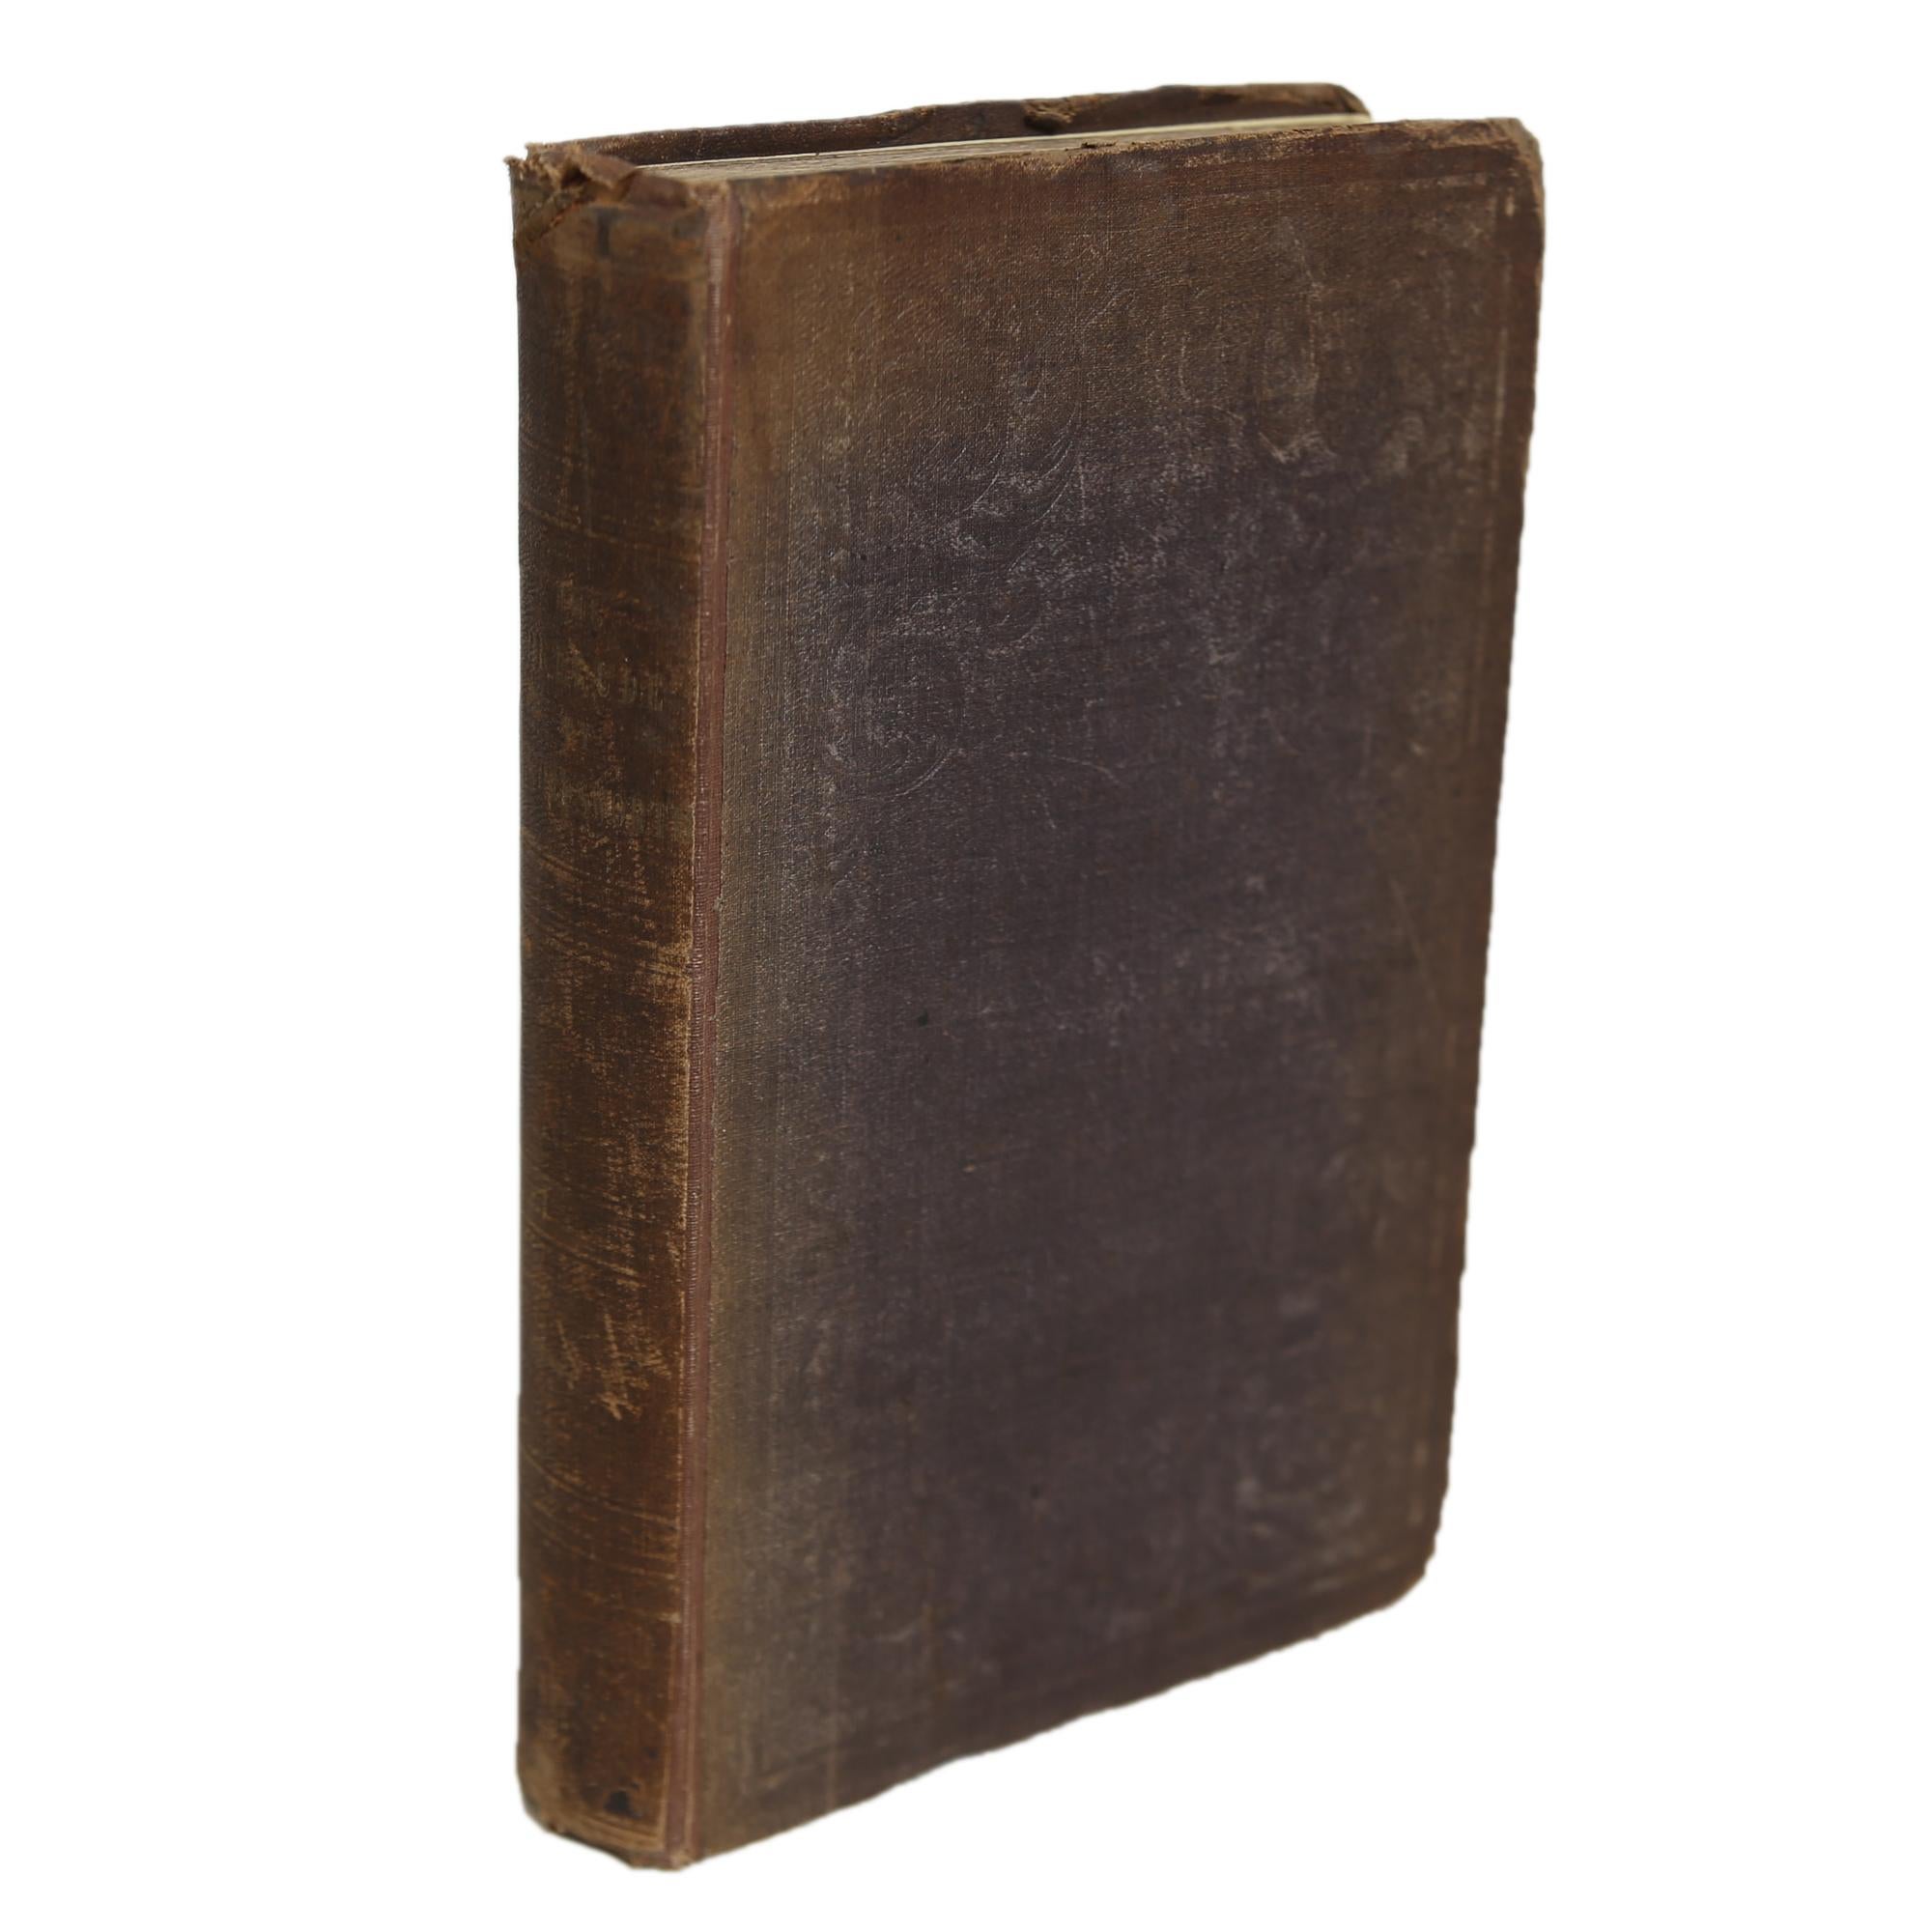 The Prelude, Growth of A Poet's Mind by William Wordsworth. Wordsworth autobiographical poem. London: Bradbury and Evans, 1850. First Edition. 375 pages. Hardcover.

A scarce copy of his defining work. The Prelude or, Growth of a Poet's Mind; An